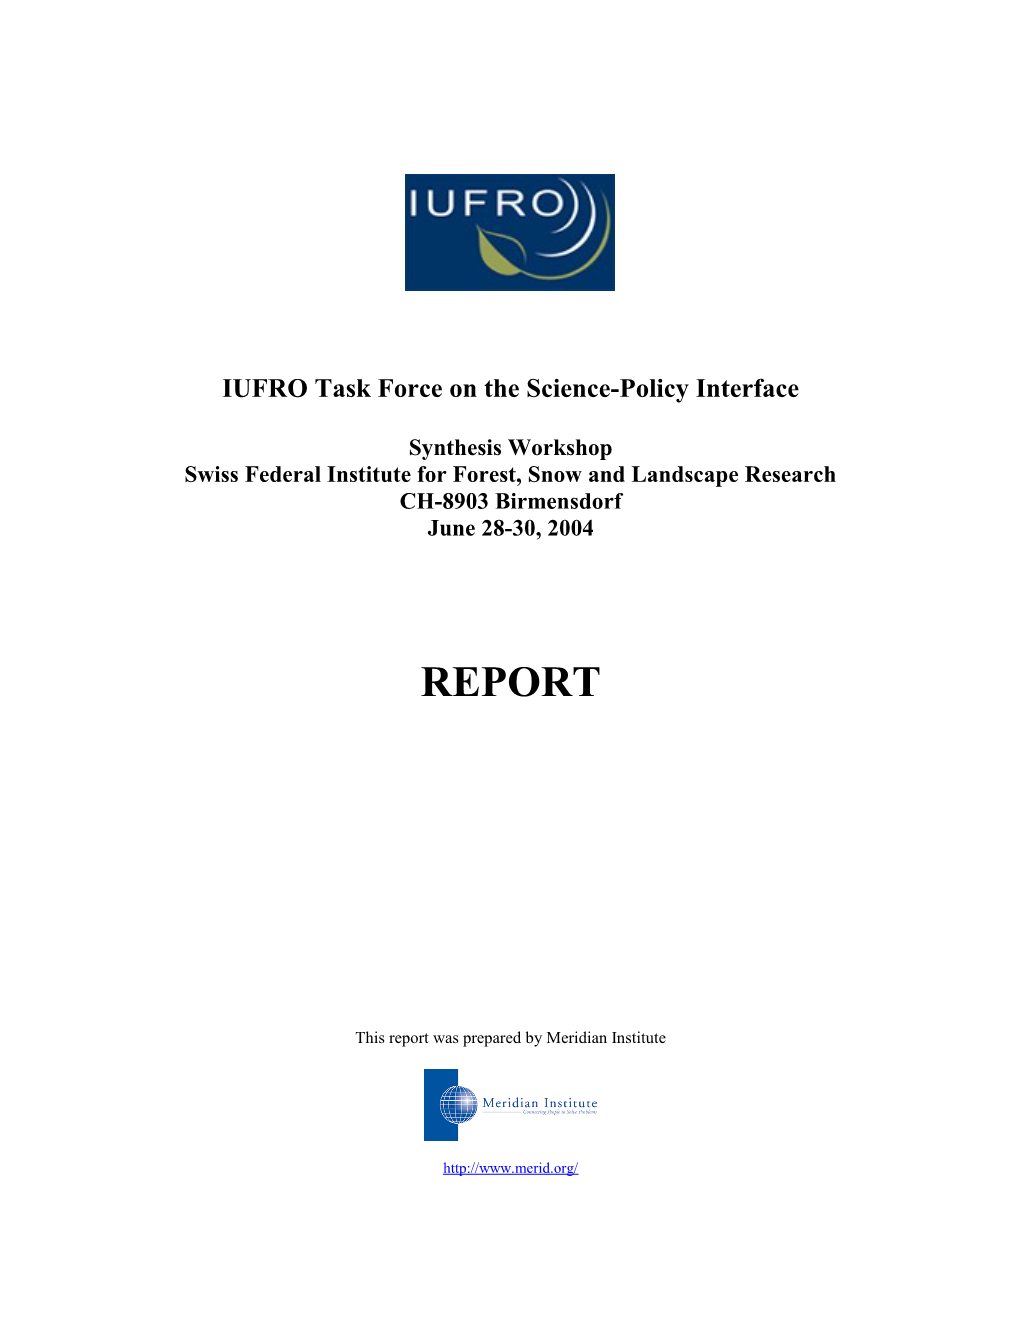 IUFRO Task Force on the Science/Policy Interface